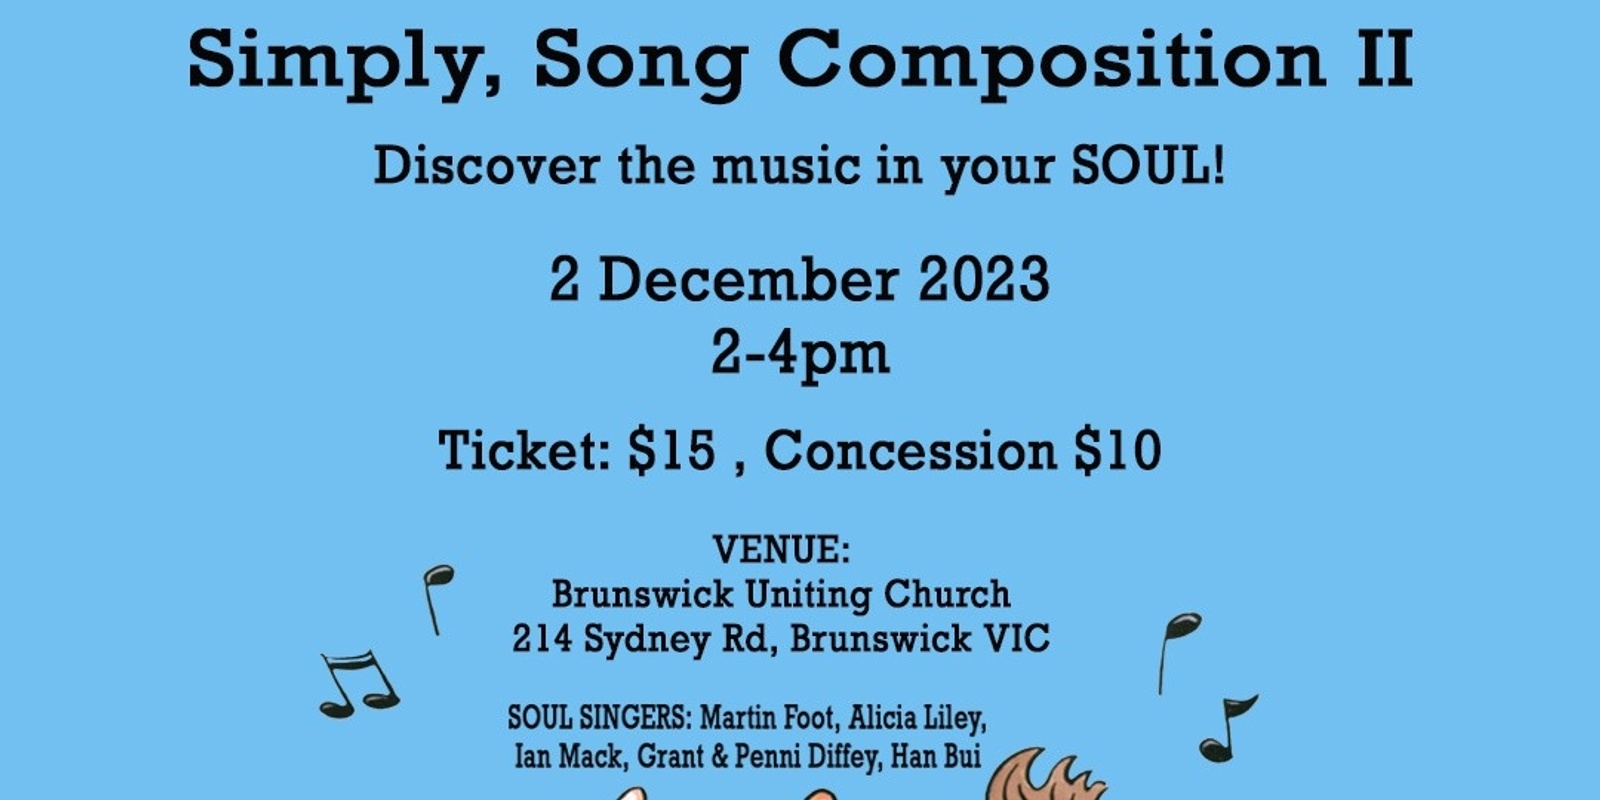 Banner image for Simply, Song Composition